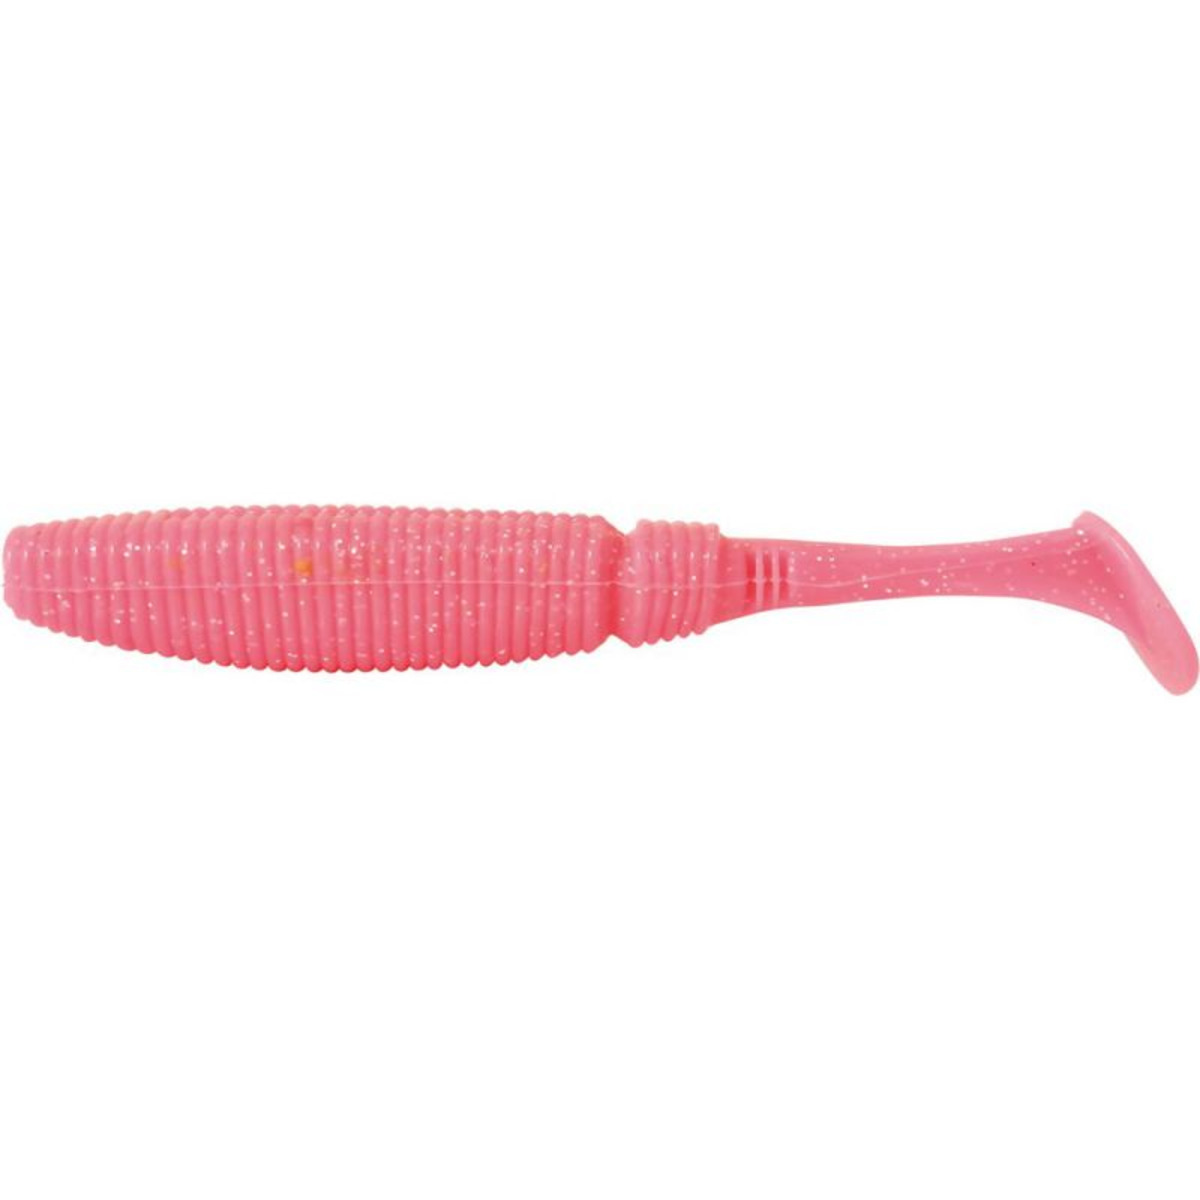 Rapture Power Shad - 11.5 cm - Fluo Pink Silver